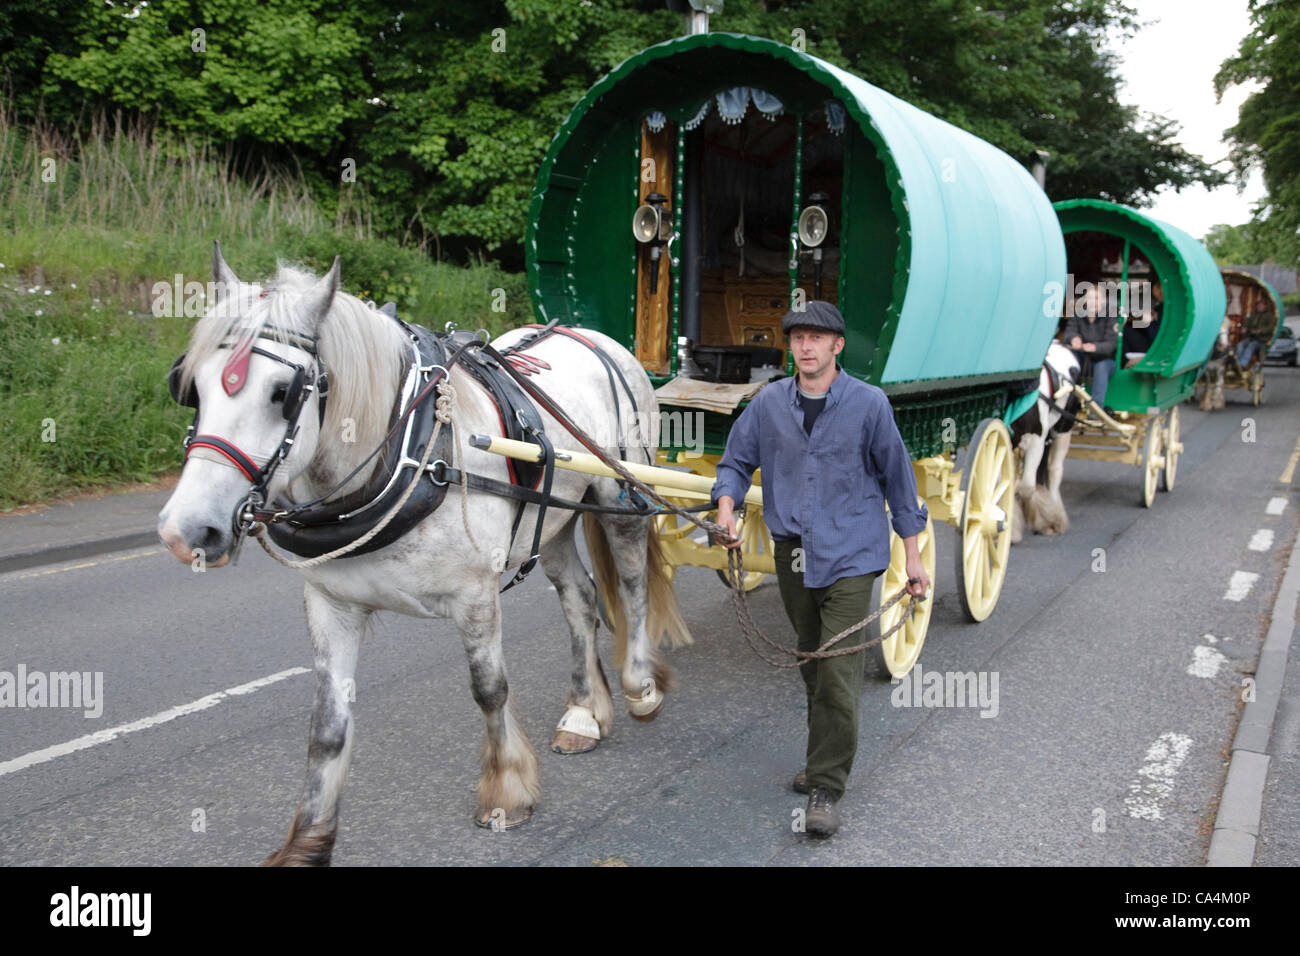 Wednesday 6th June 2012 at Appleby, Cumbria, England, UK.  Horse drawn bow-top wagons arrive from all over the UK for Appleby Fair, the biggest annual gathering of Gypsies and Travellers in Europe. Jason Plant (pictured) makes his own wagons, and has spent two and a half weeks on the road to reach t Stock Photo